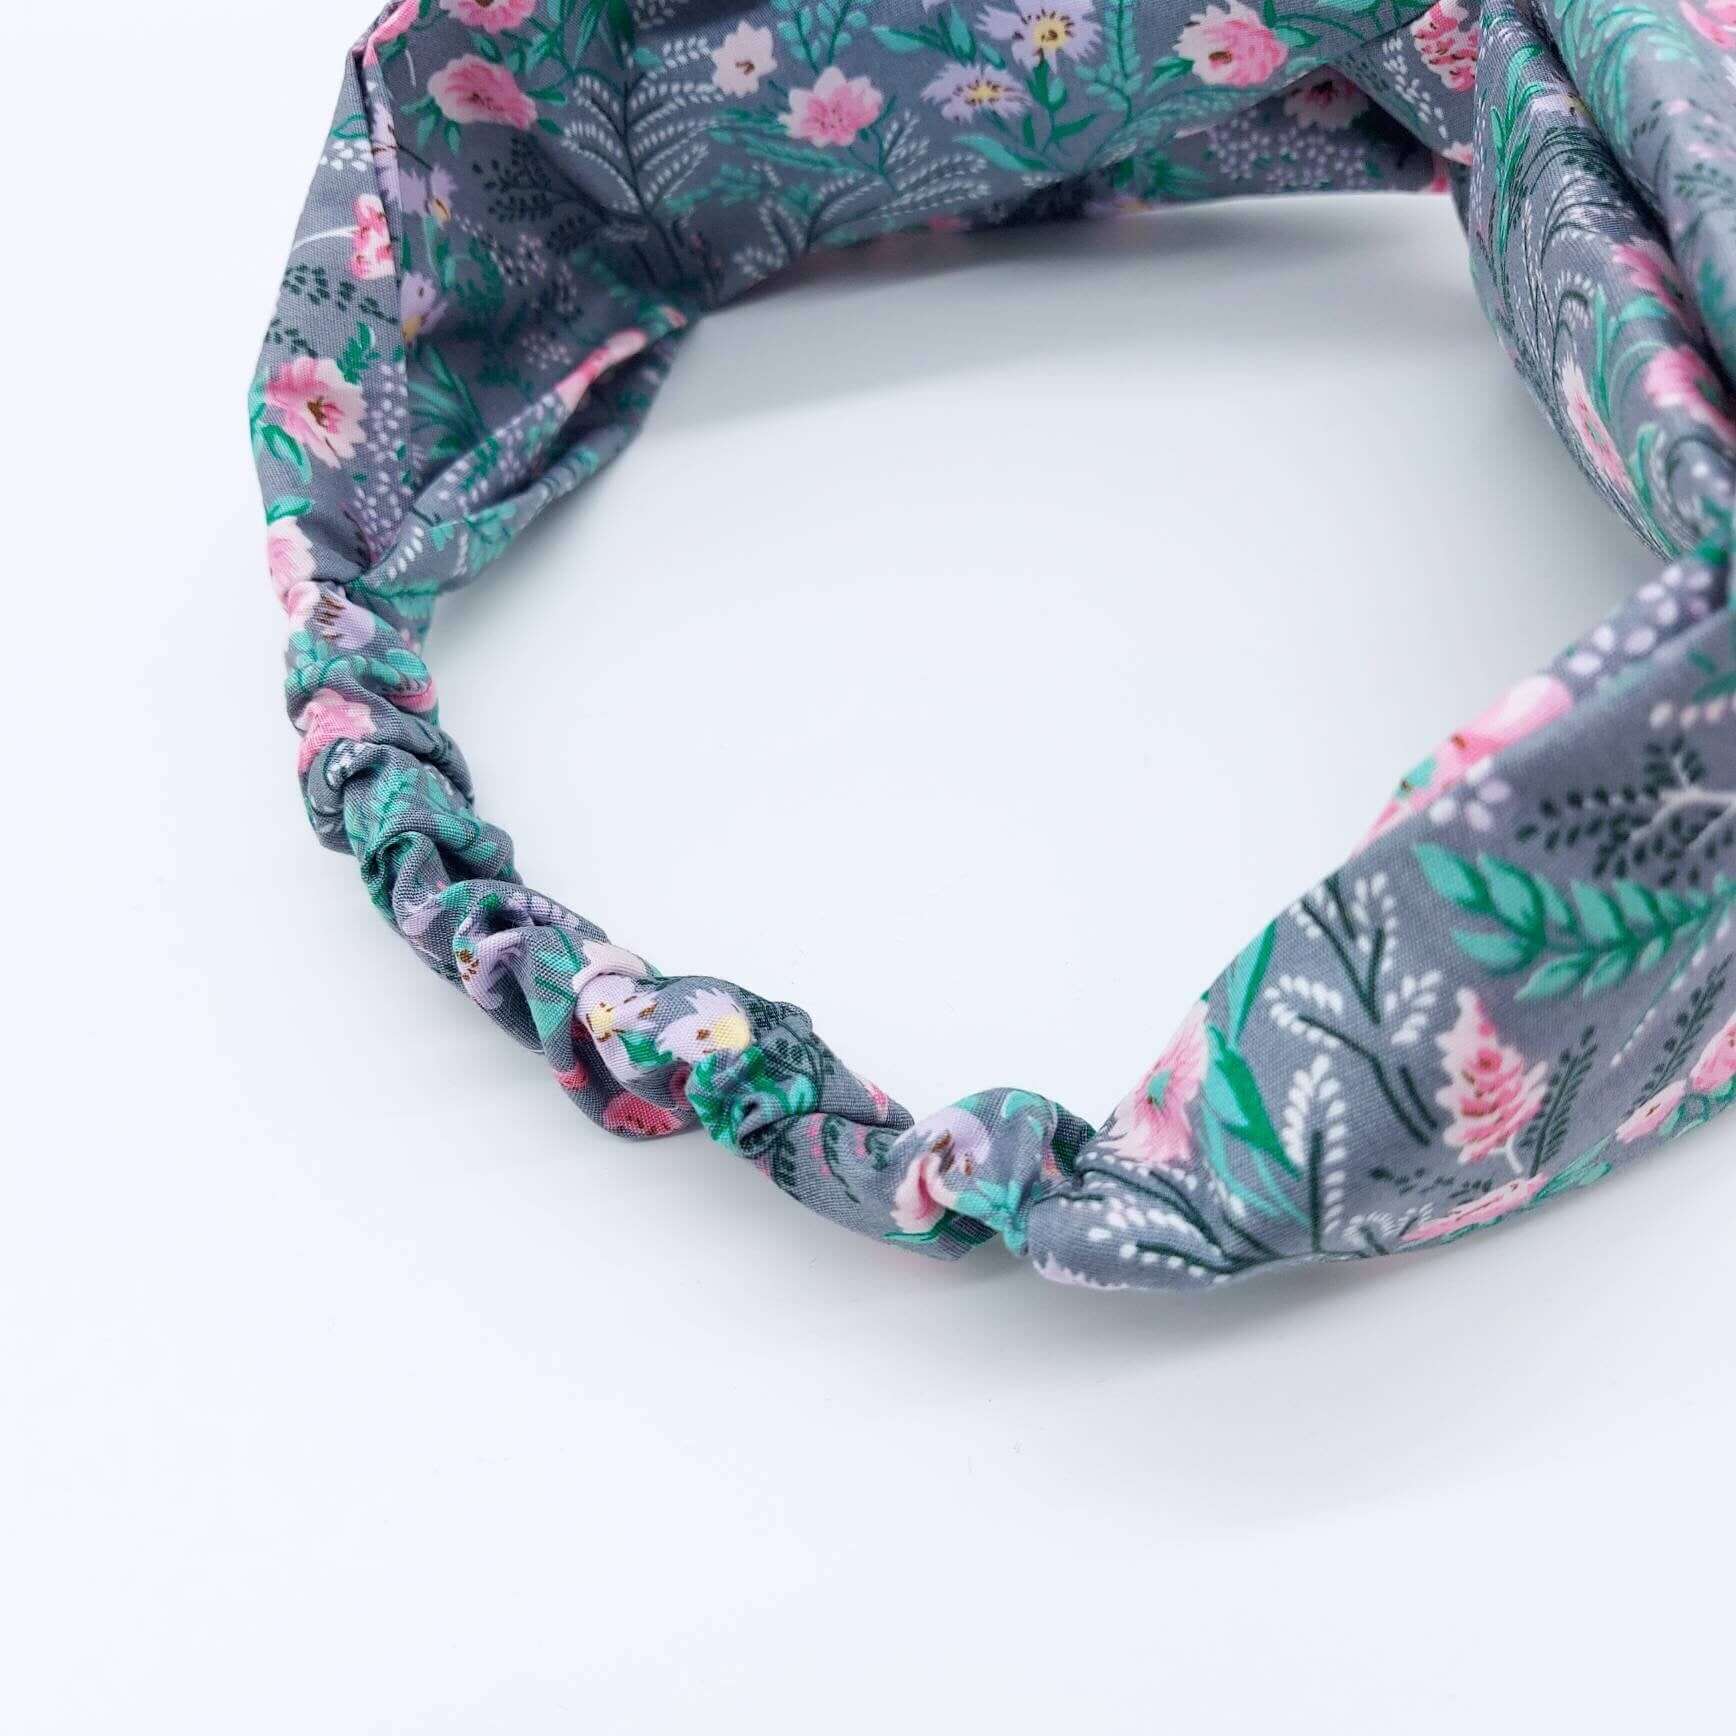 A pretty grey cotton, ditsy floral print turban twist headband with an elasticated panel at the back.